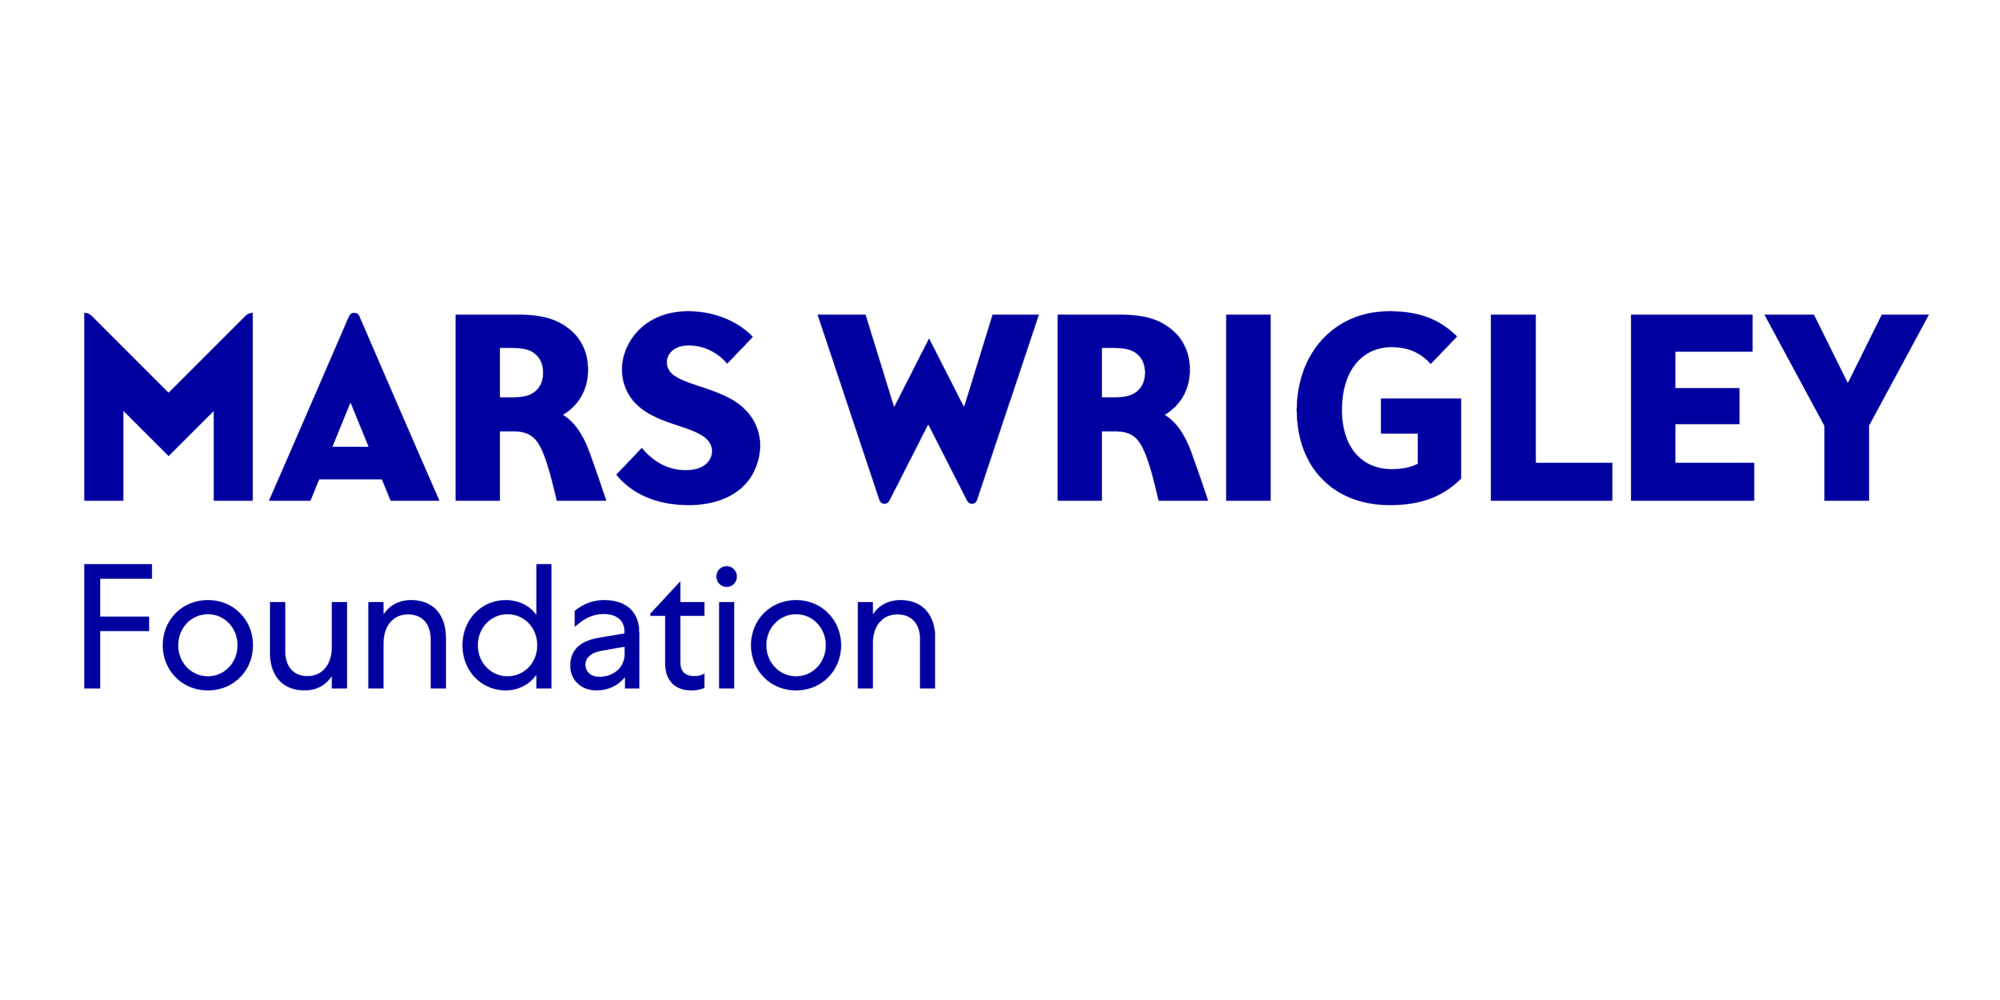 Mars Wrigley Foundation is vital to building our programs for children, and we are grateful to them for their unique contributions to Save the Children.